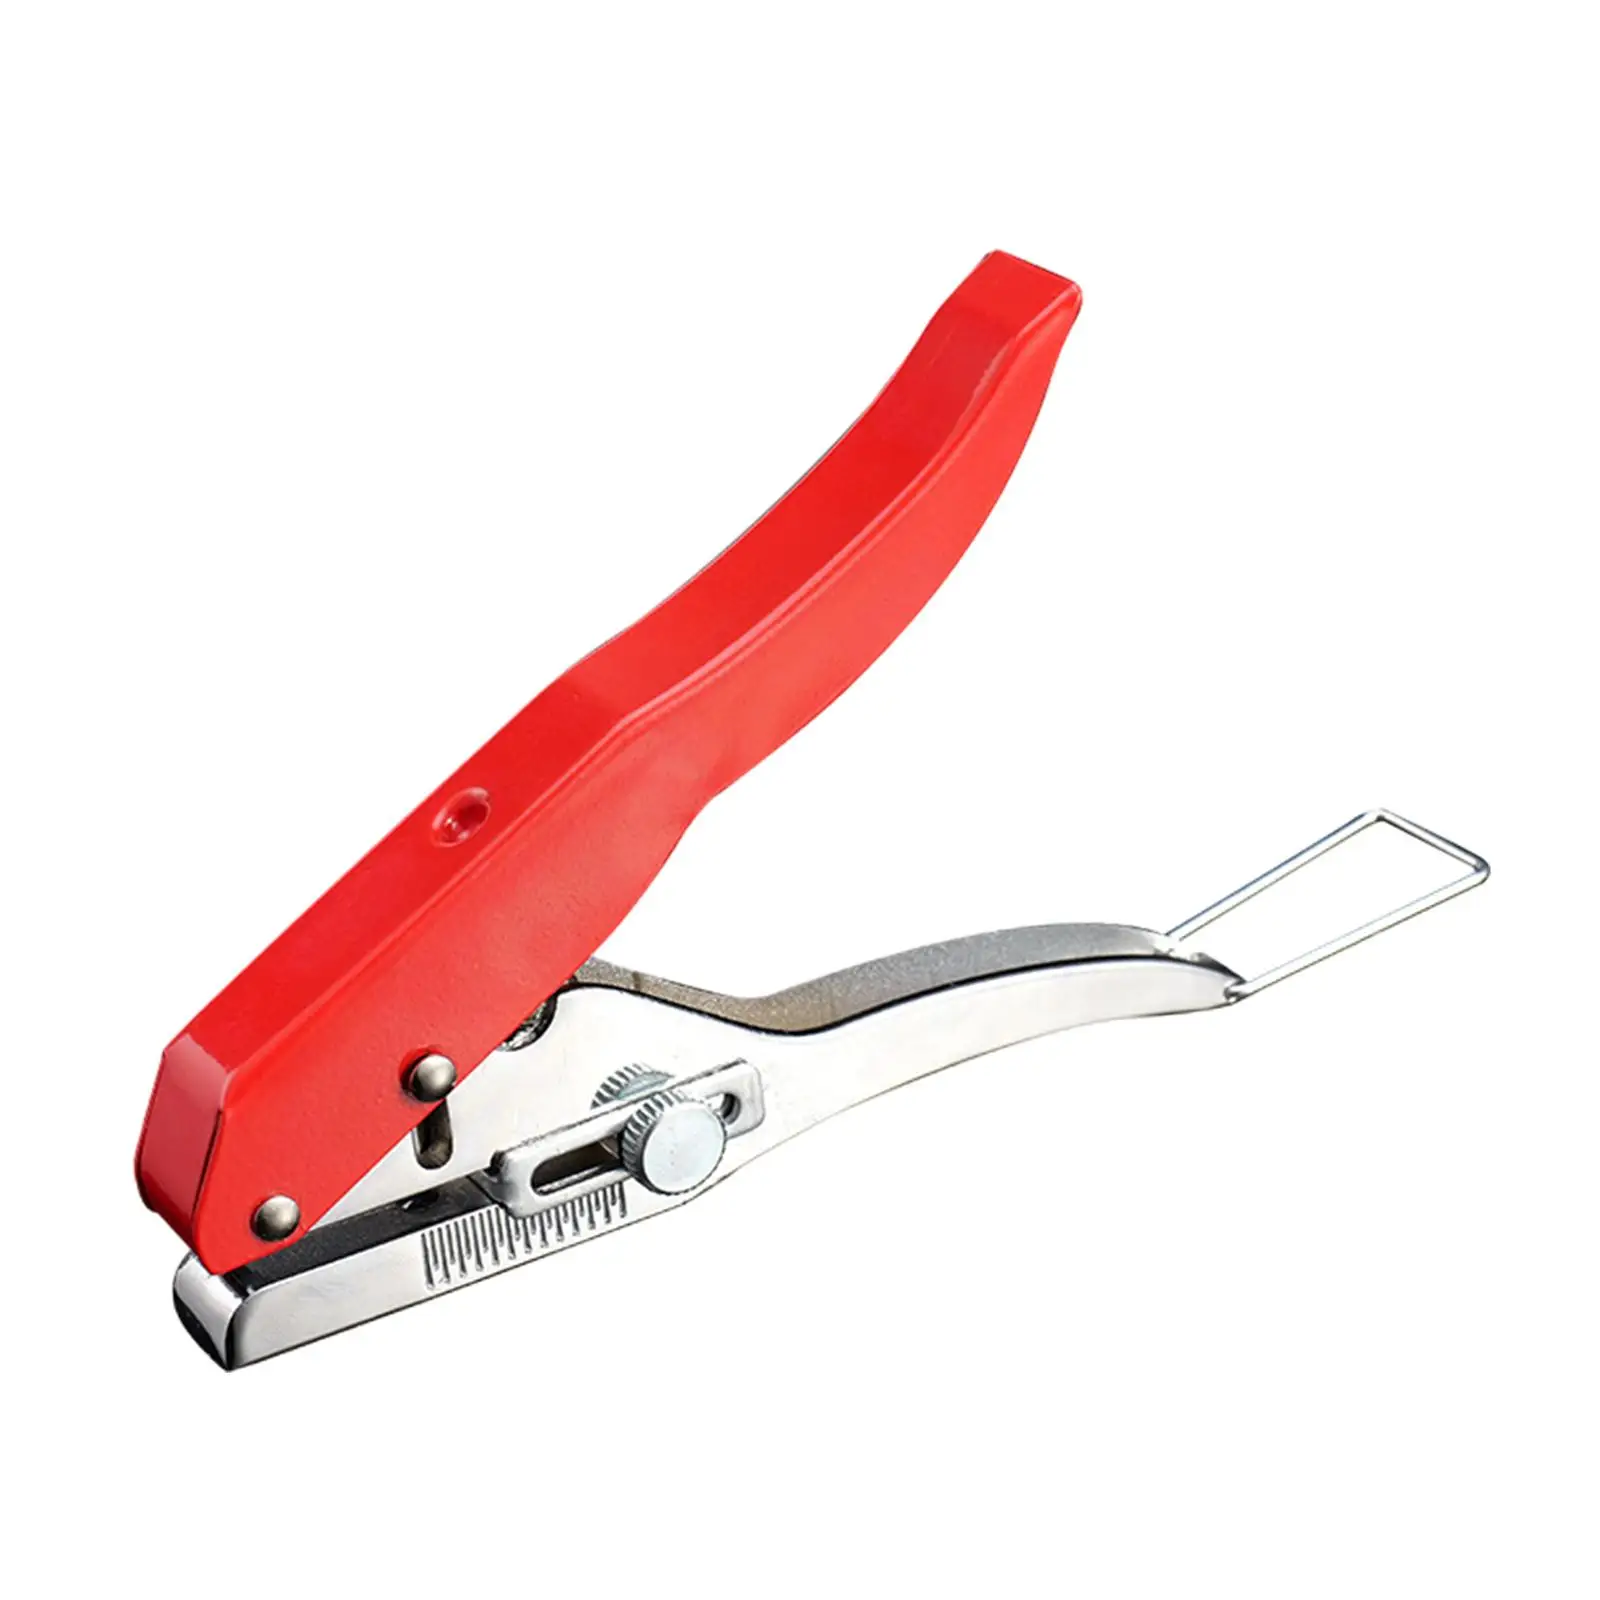 Single Hole Punch with Scale Portable Metal Paper Puncher 8mm Hole Punching Pliers for Craft Paper Hard Film Paper Card Project